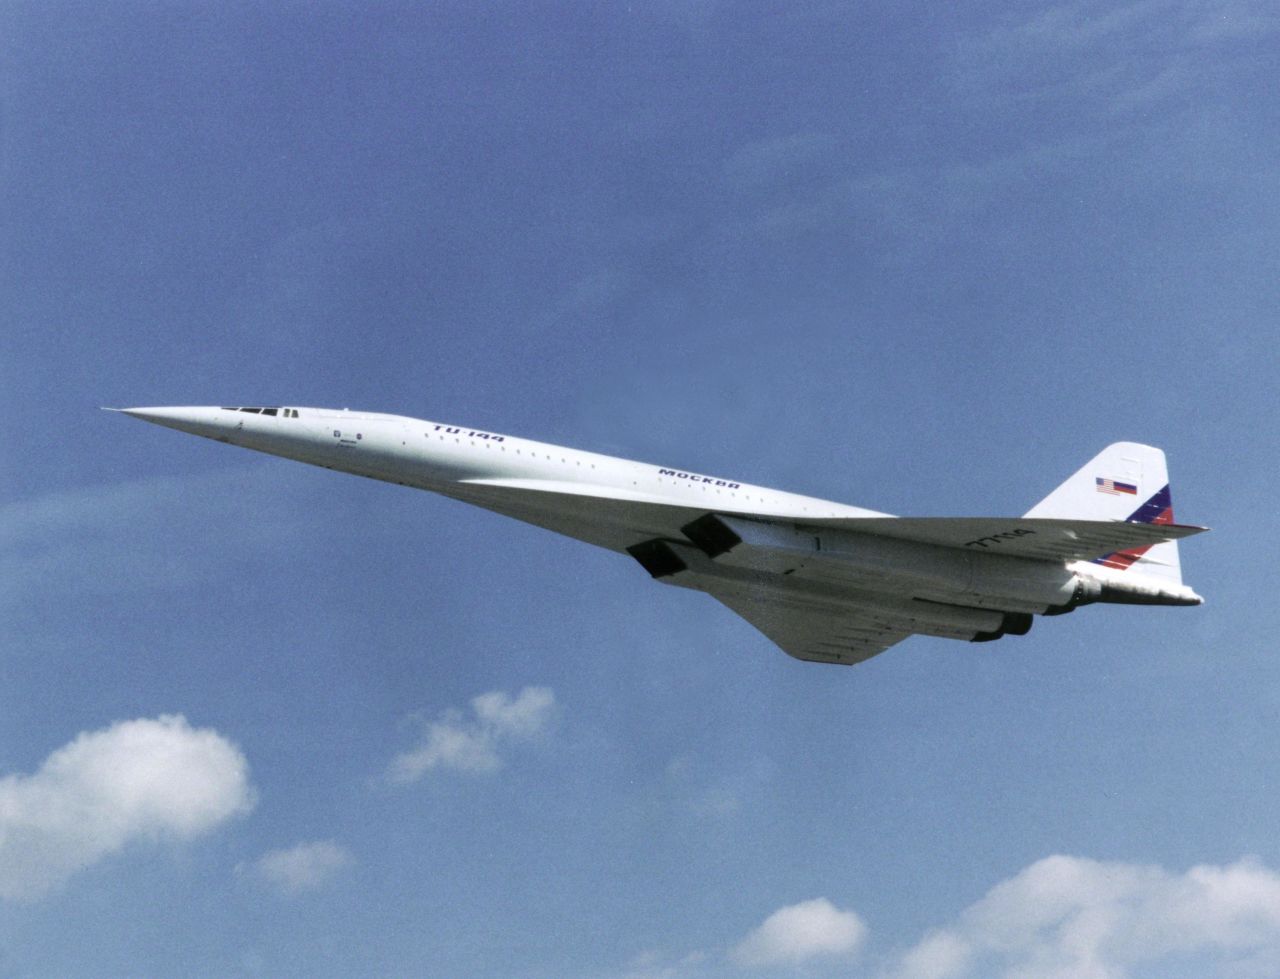 The Tupolev Tu-144 operated from 1968 to 1999. 